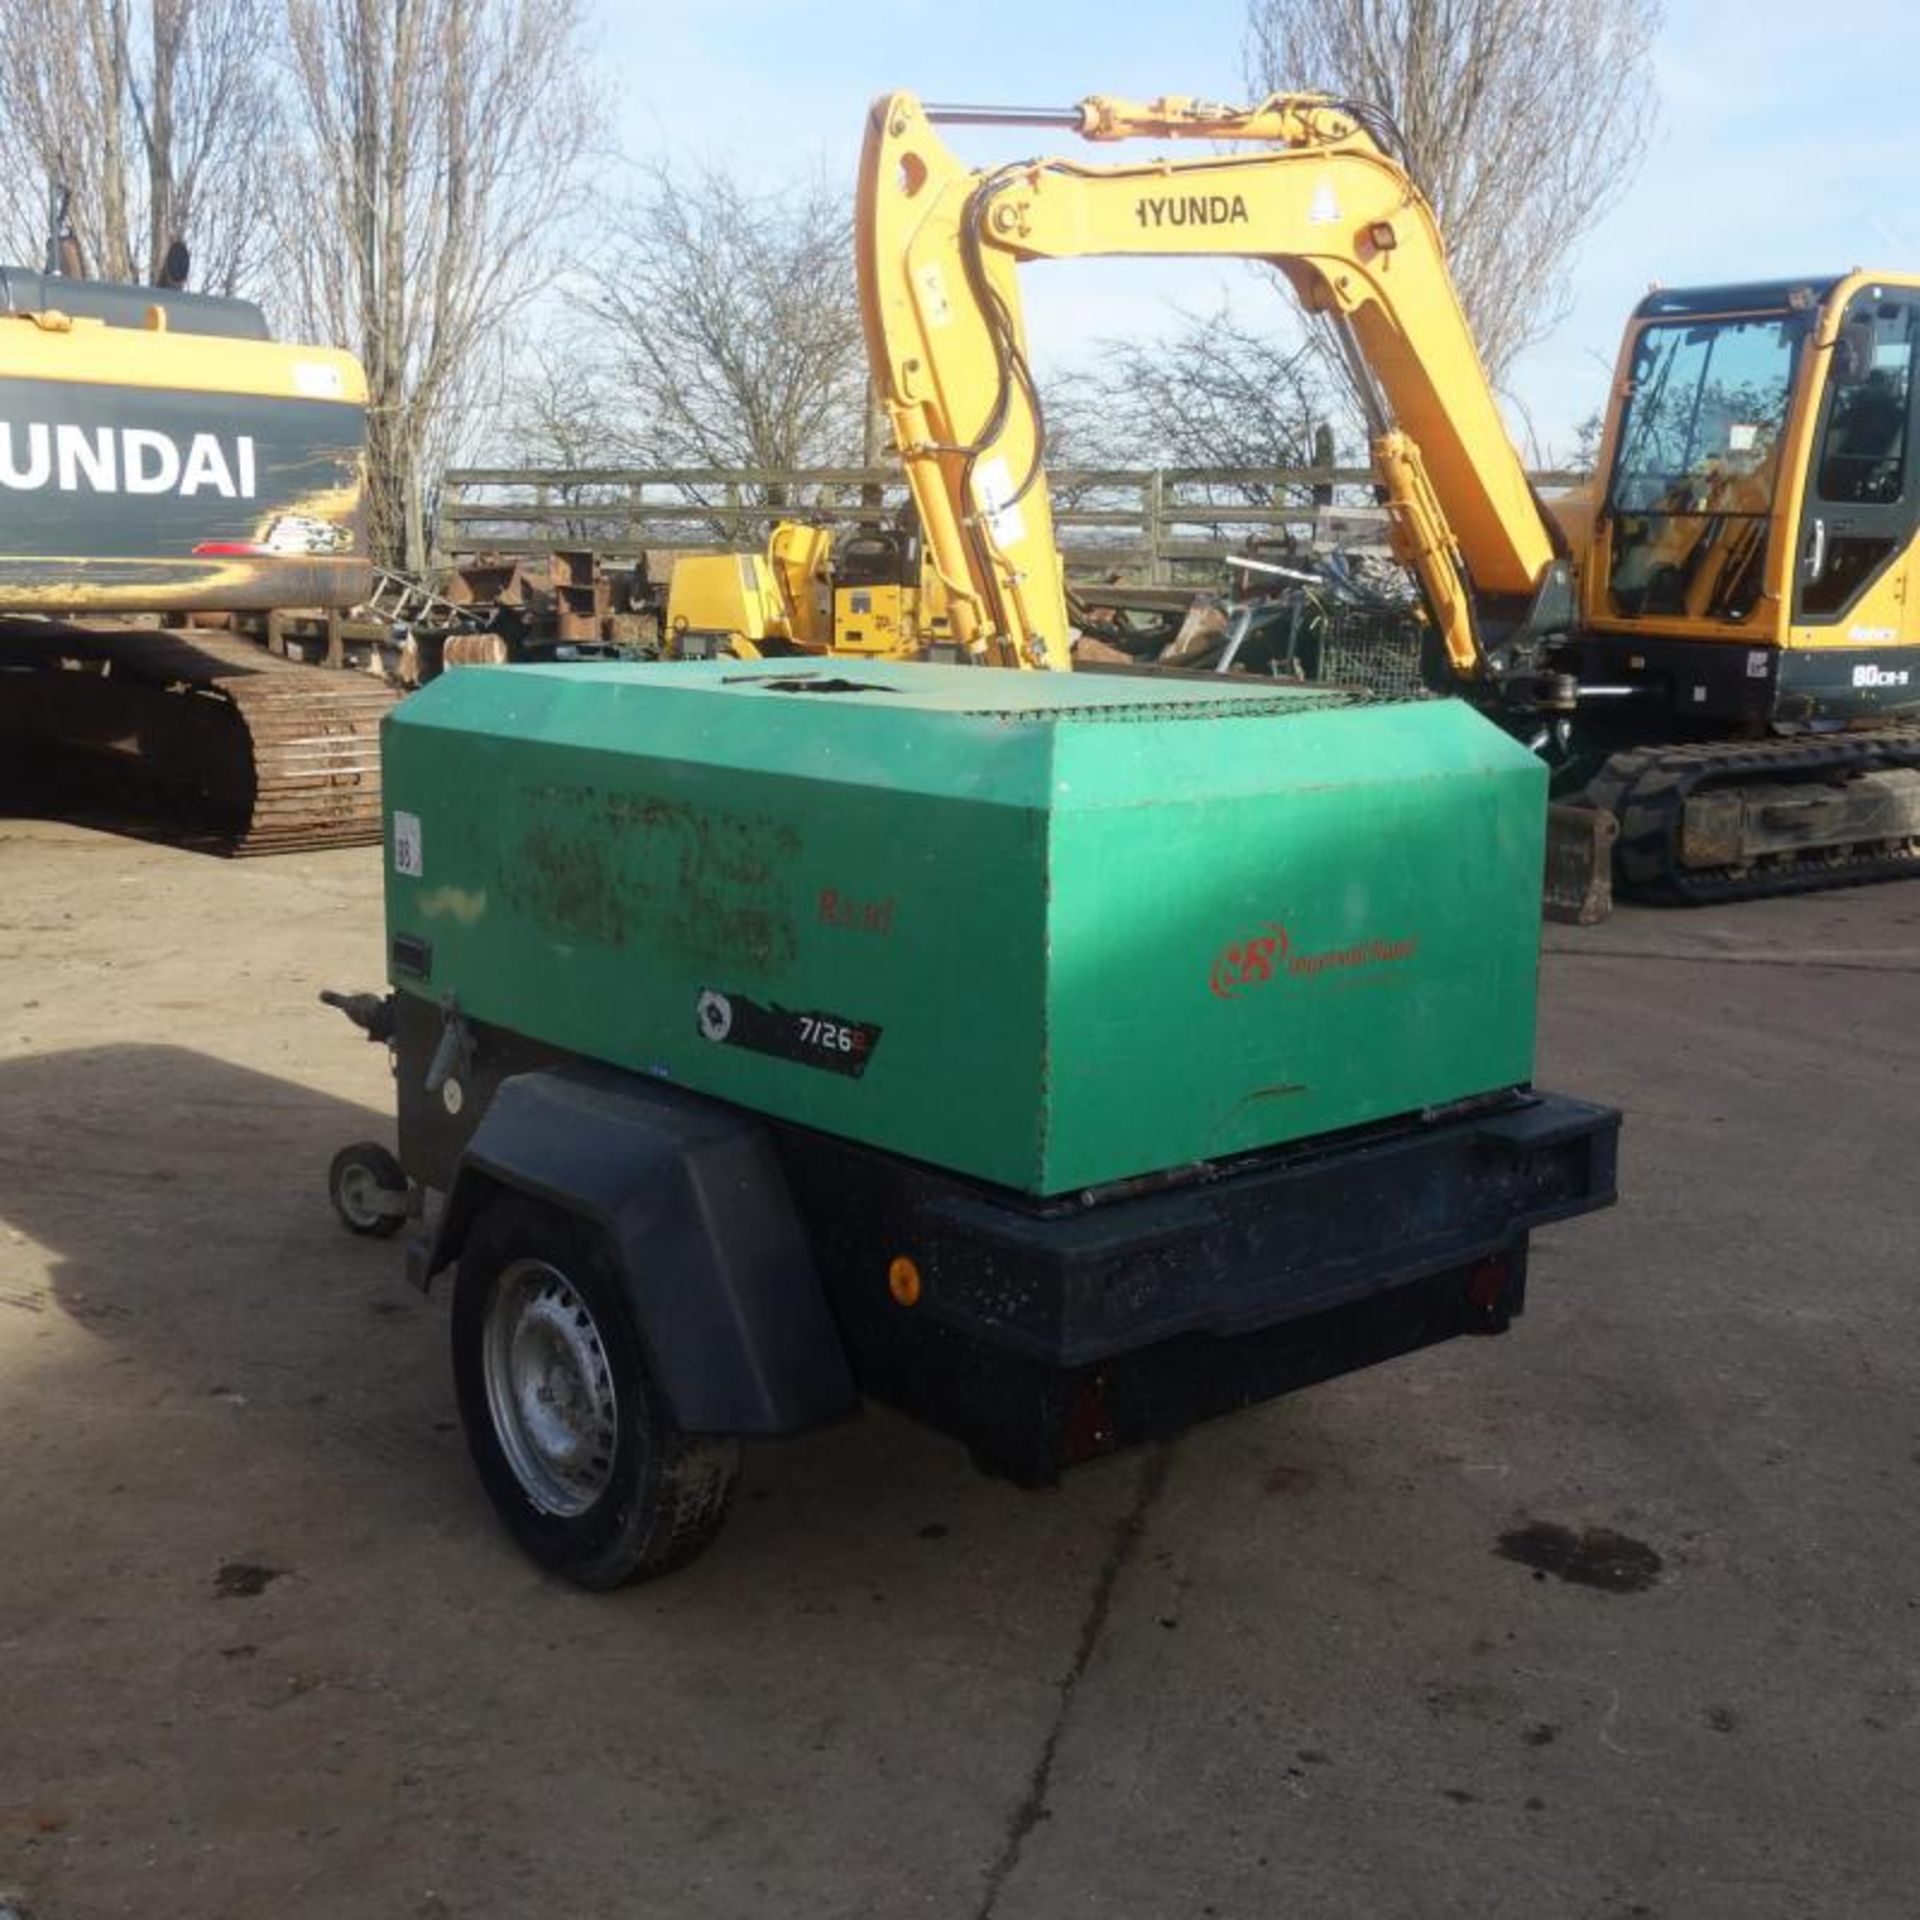 2006 Inersollrand 726e Compressor, Only 3702 Hours From New - Bild 3 aus 6